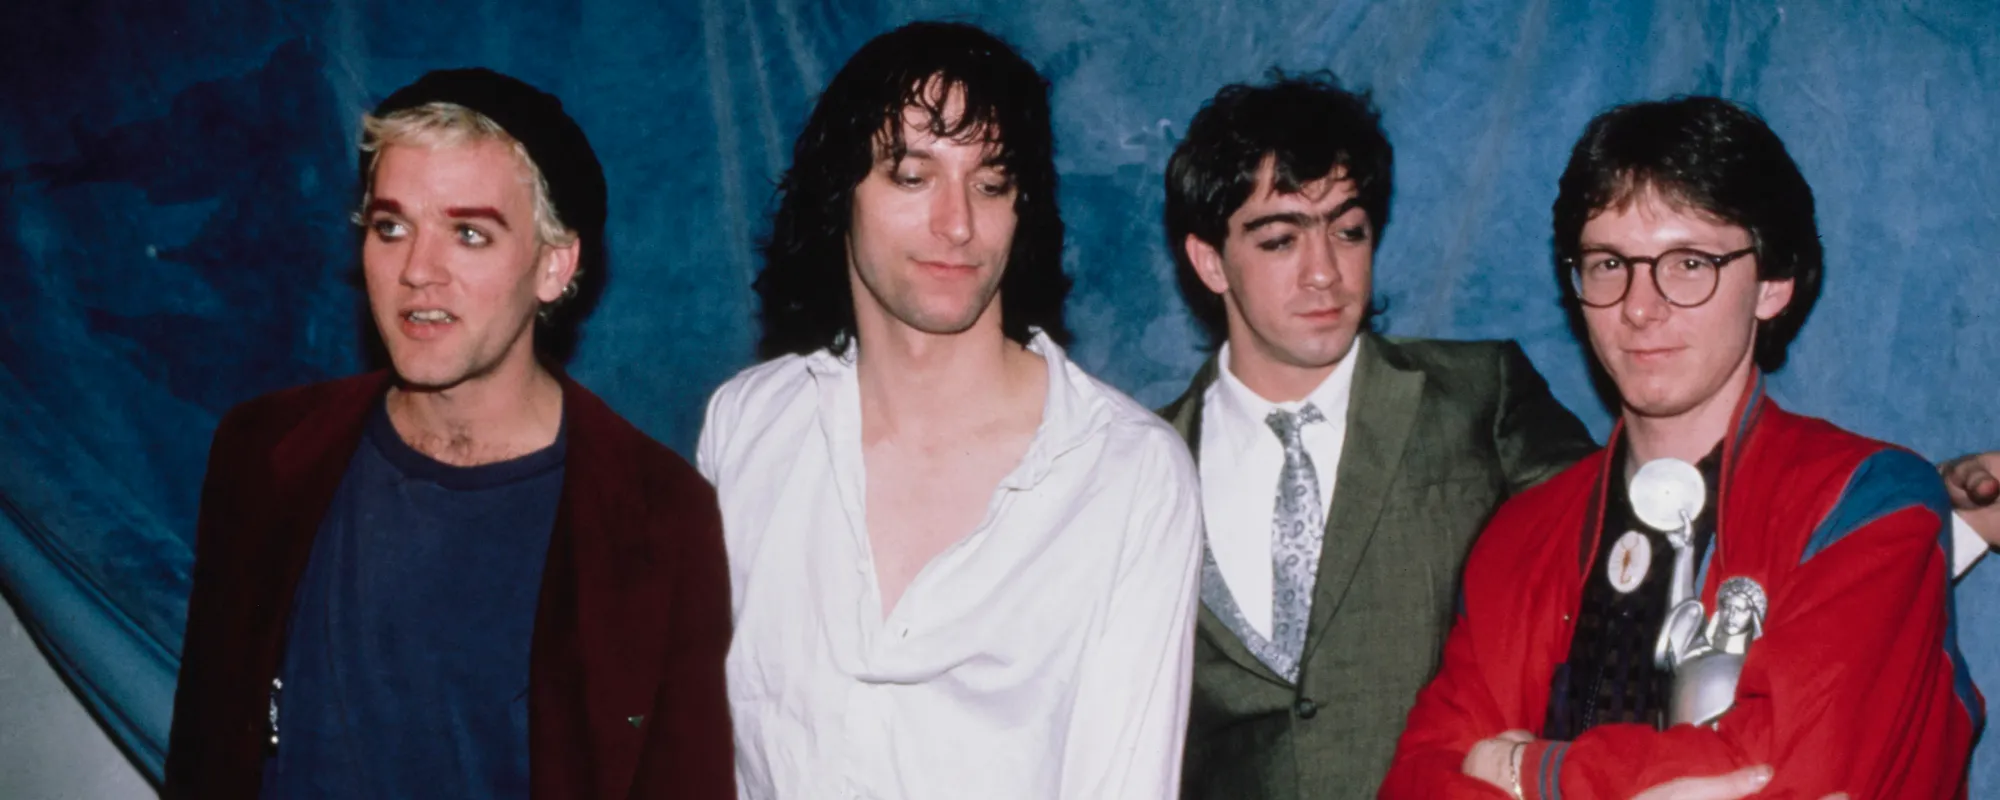 The Meaning Behind “So. Central Rain” by R.E.M. and How a Real-Life Weather Event Inspired It